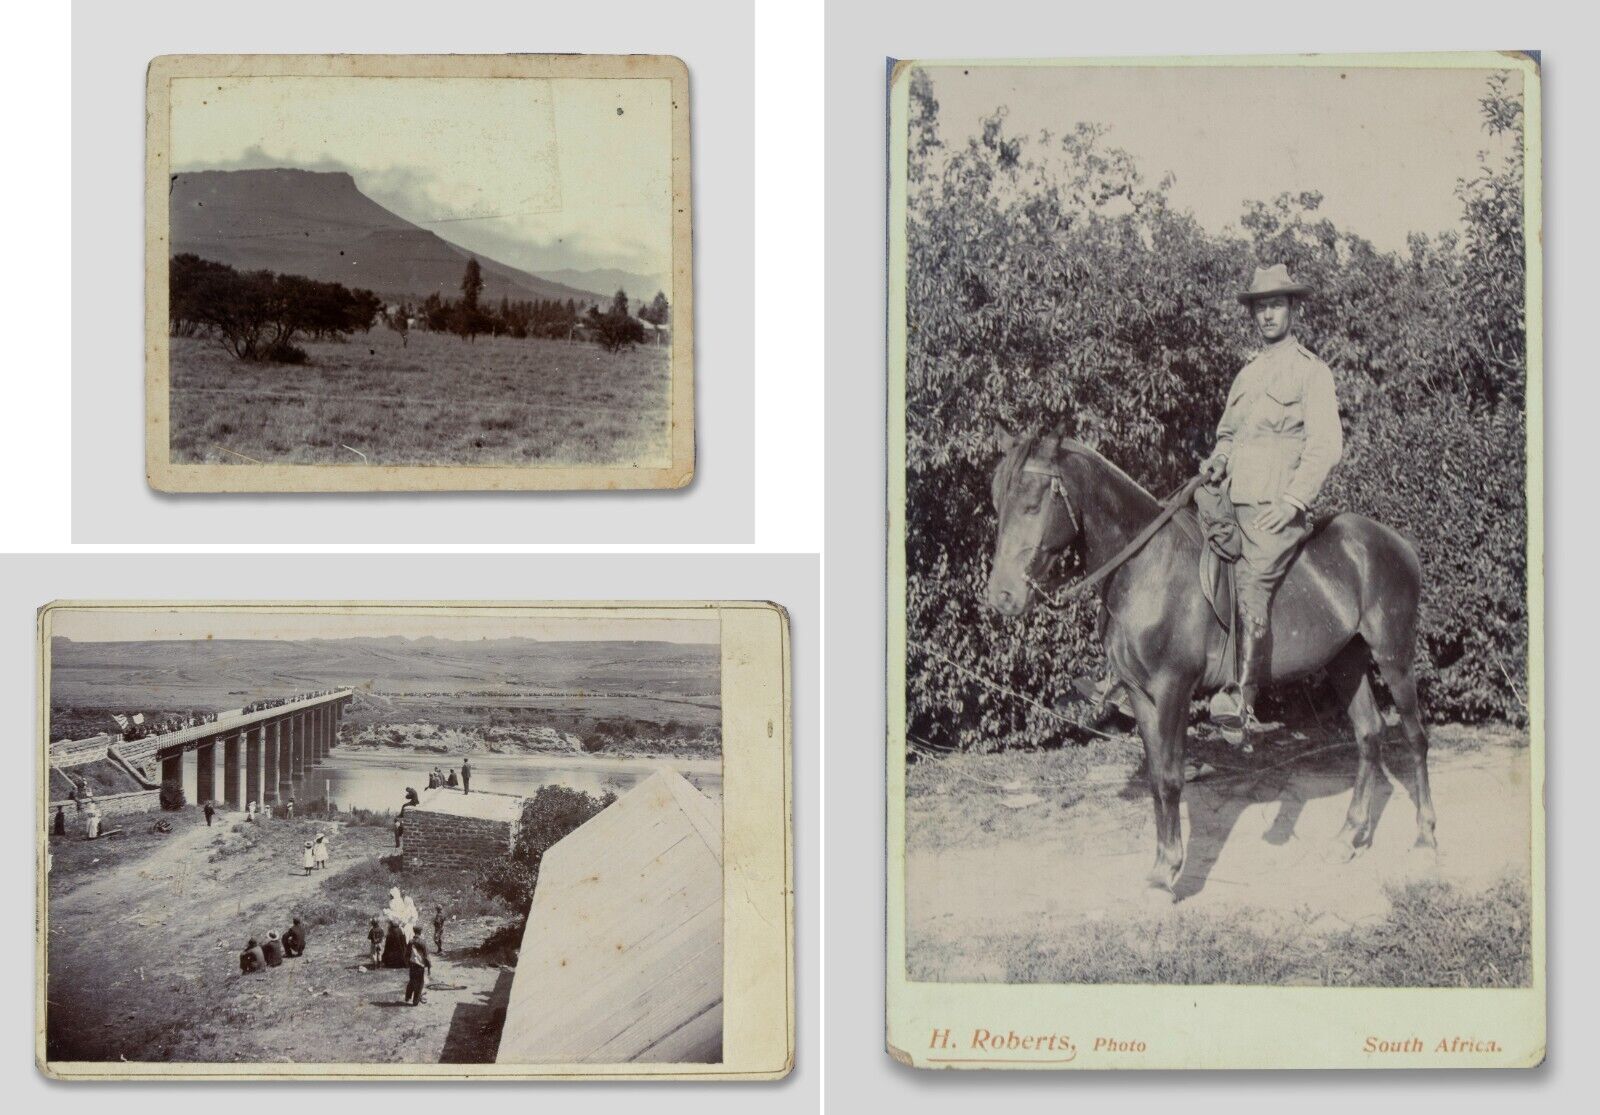 c1900 SOUTH AFRICA Boer war three mounted 'cabinet card' style photographs